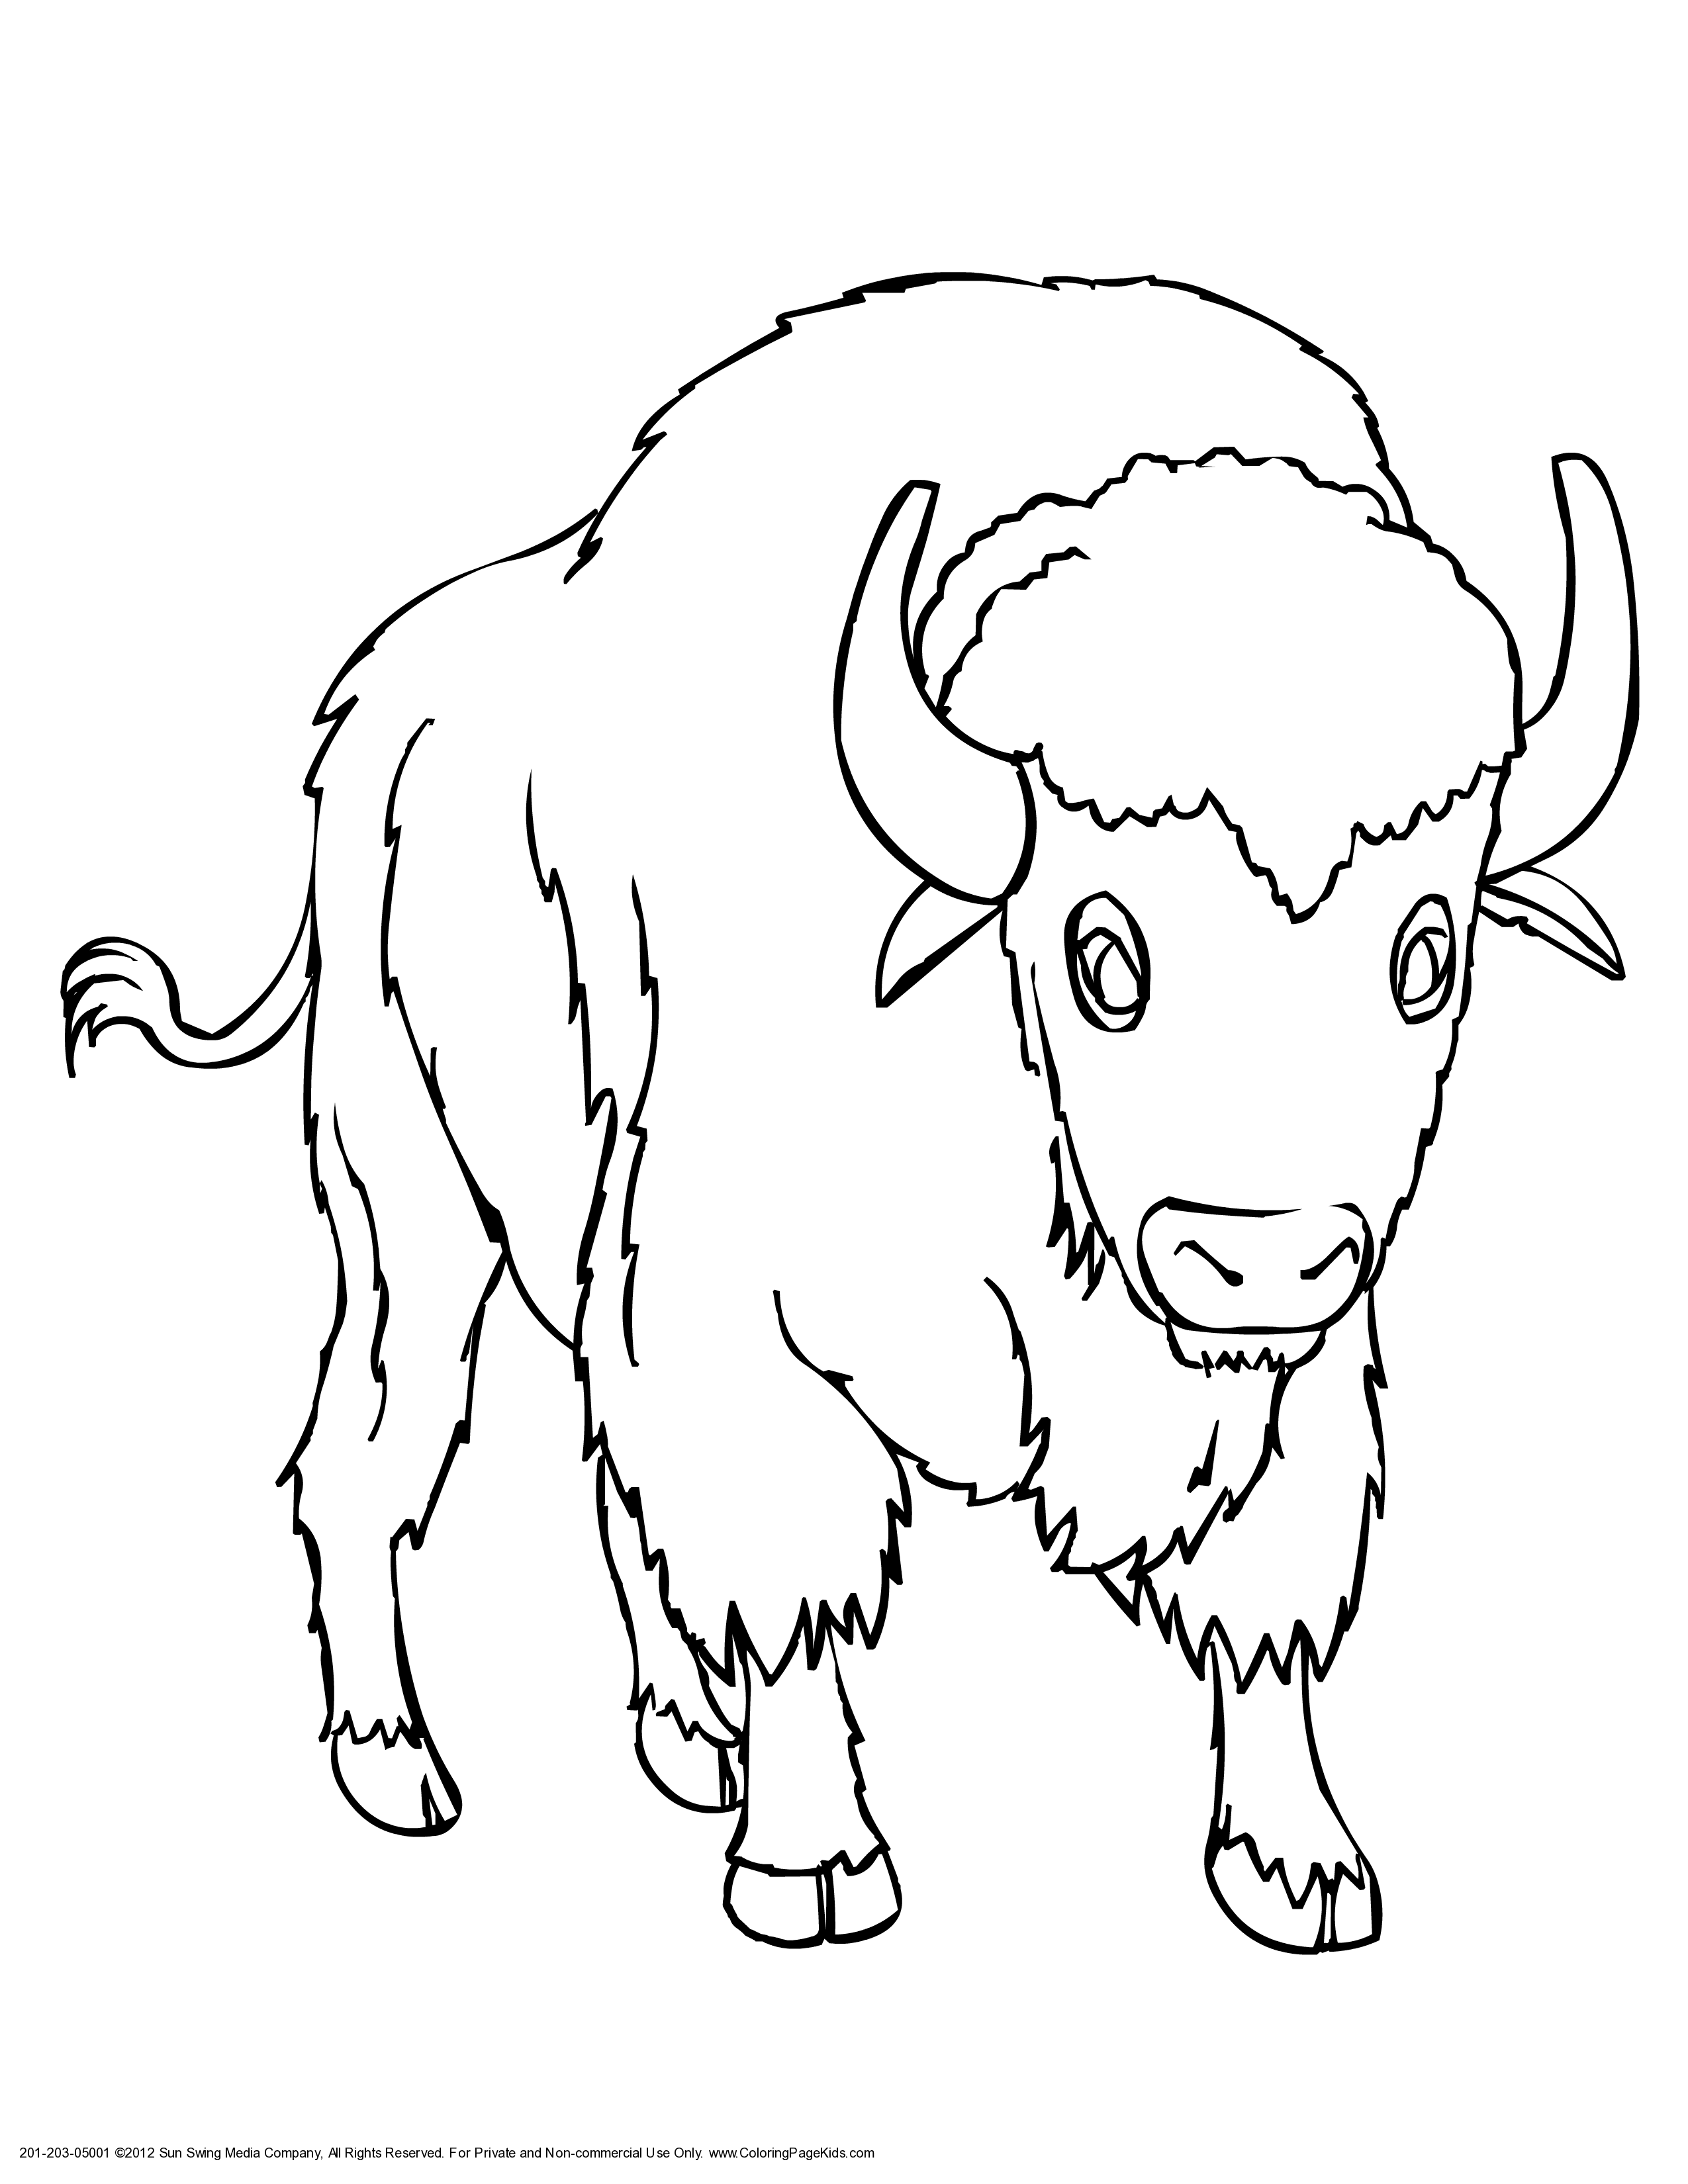 A Bison or Buffalo Coloring Page